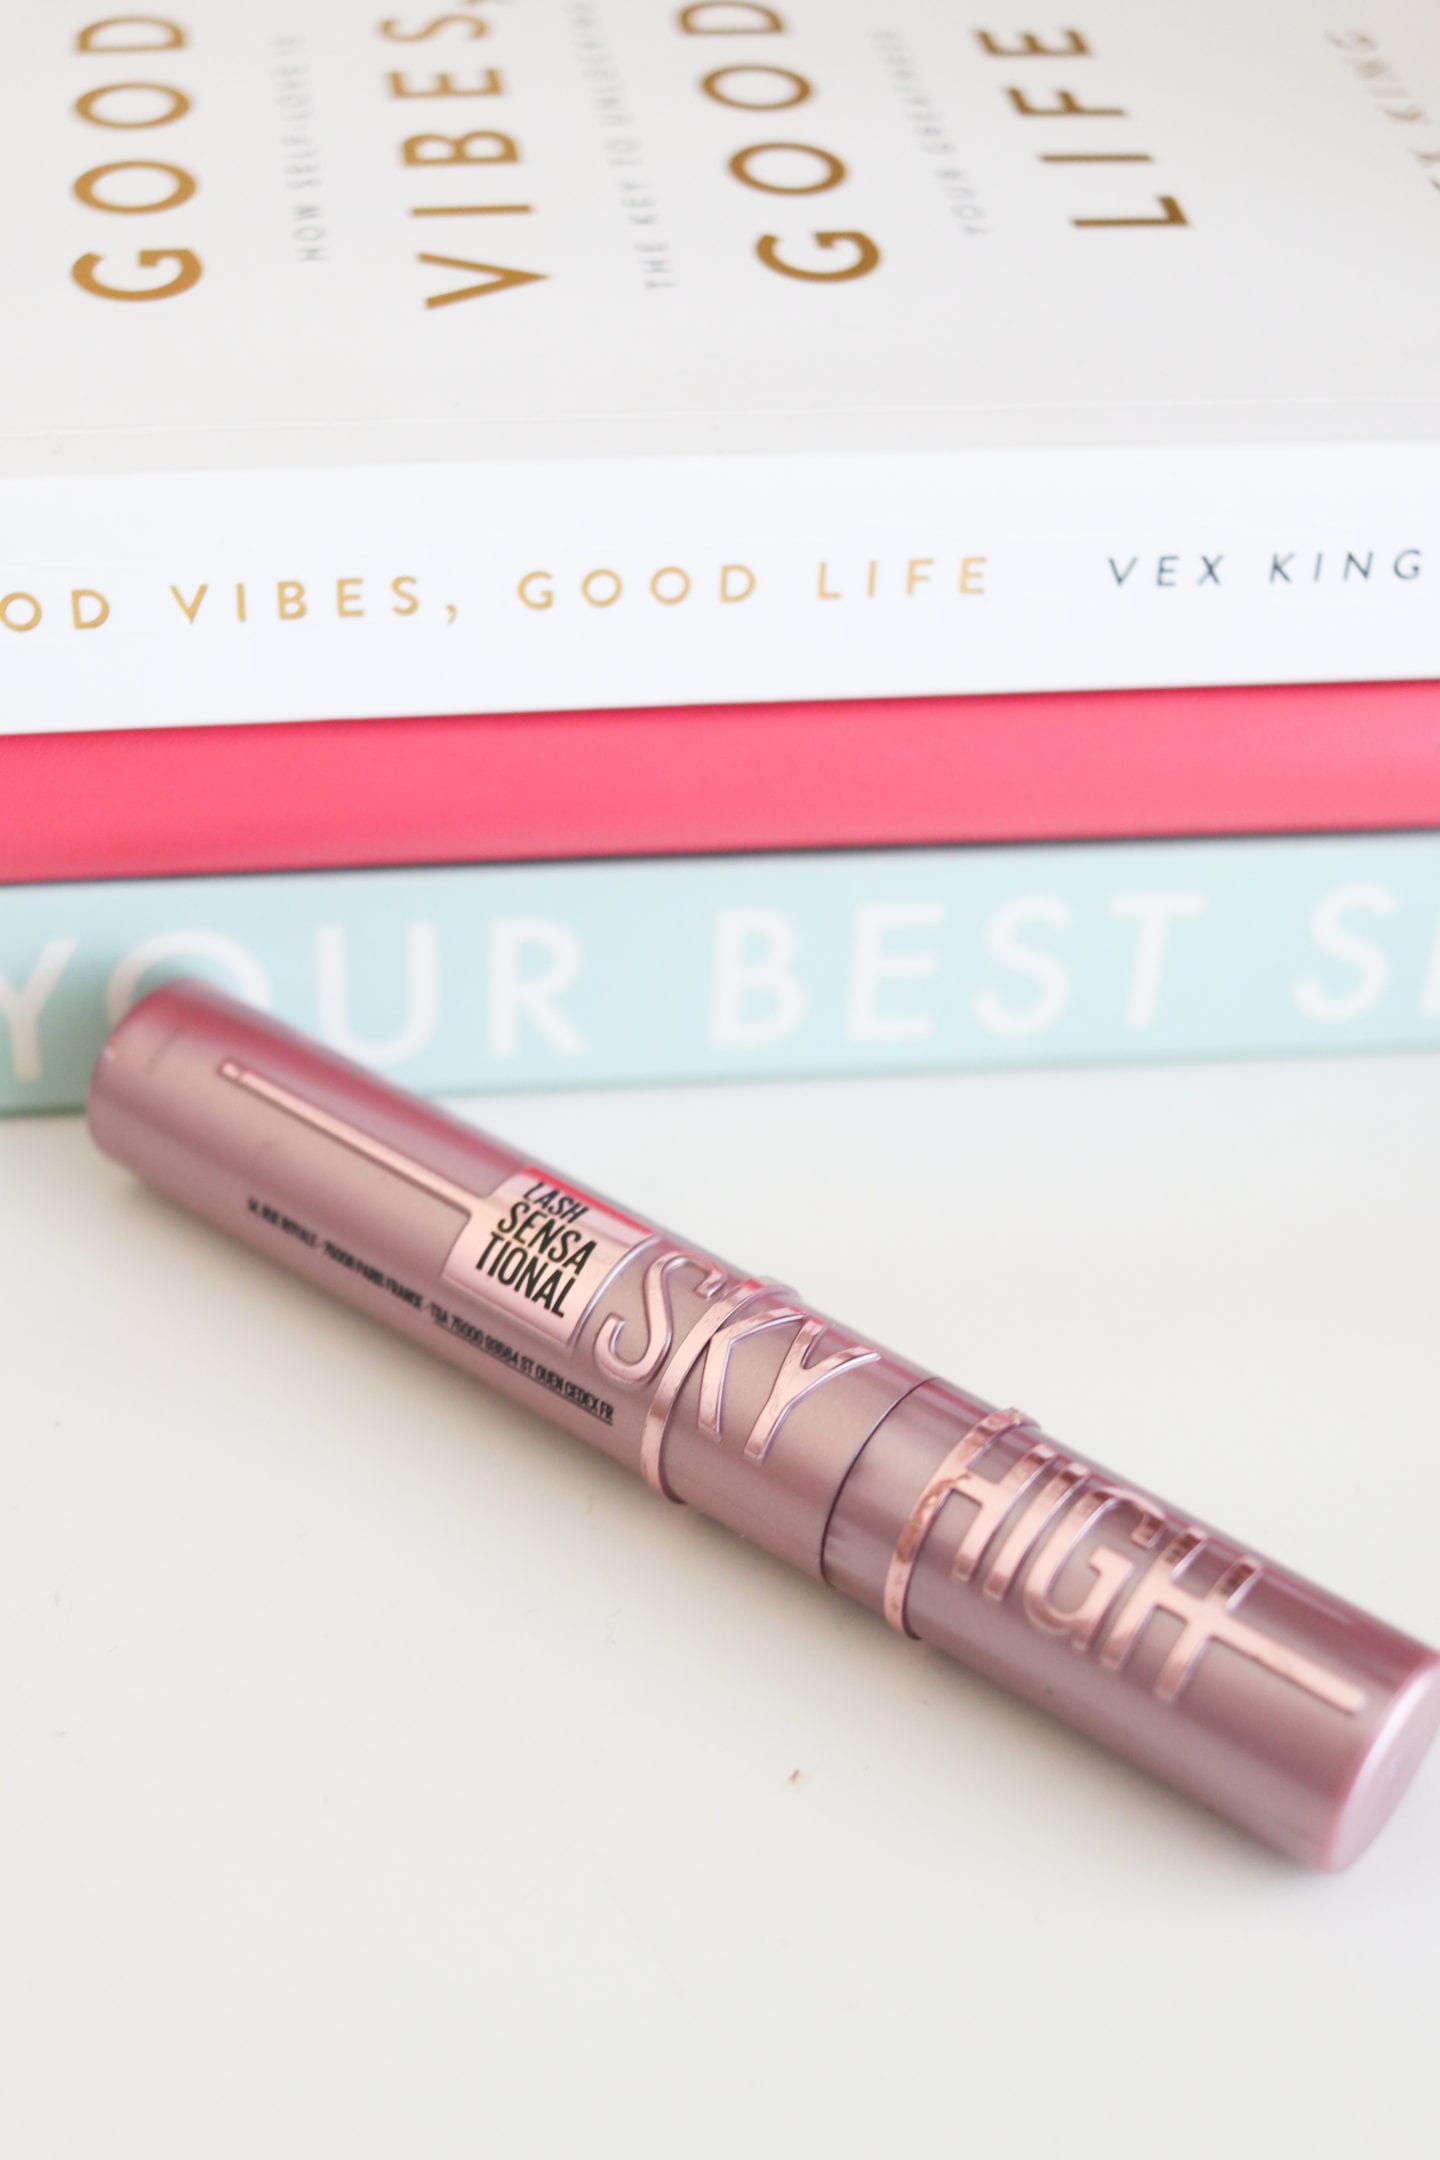 Maybelline Lash Sensational Sky High Mascara Review, before & after photos